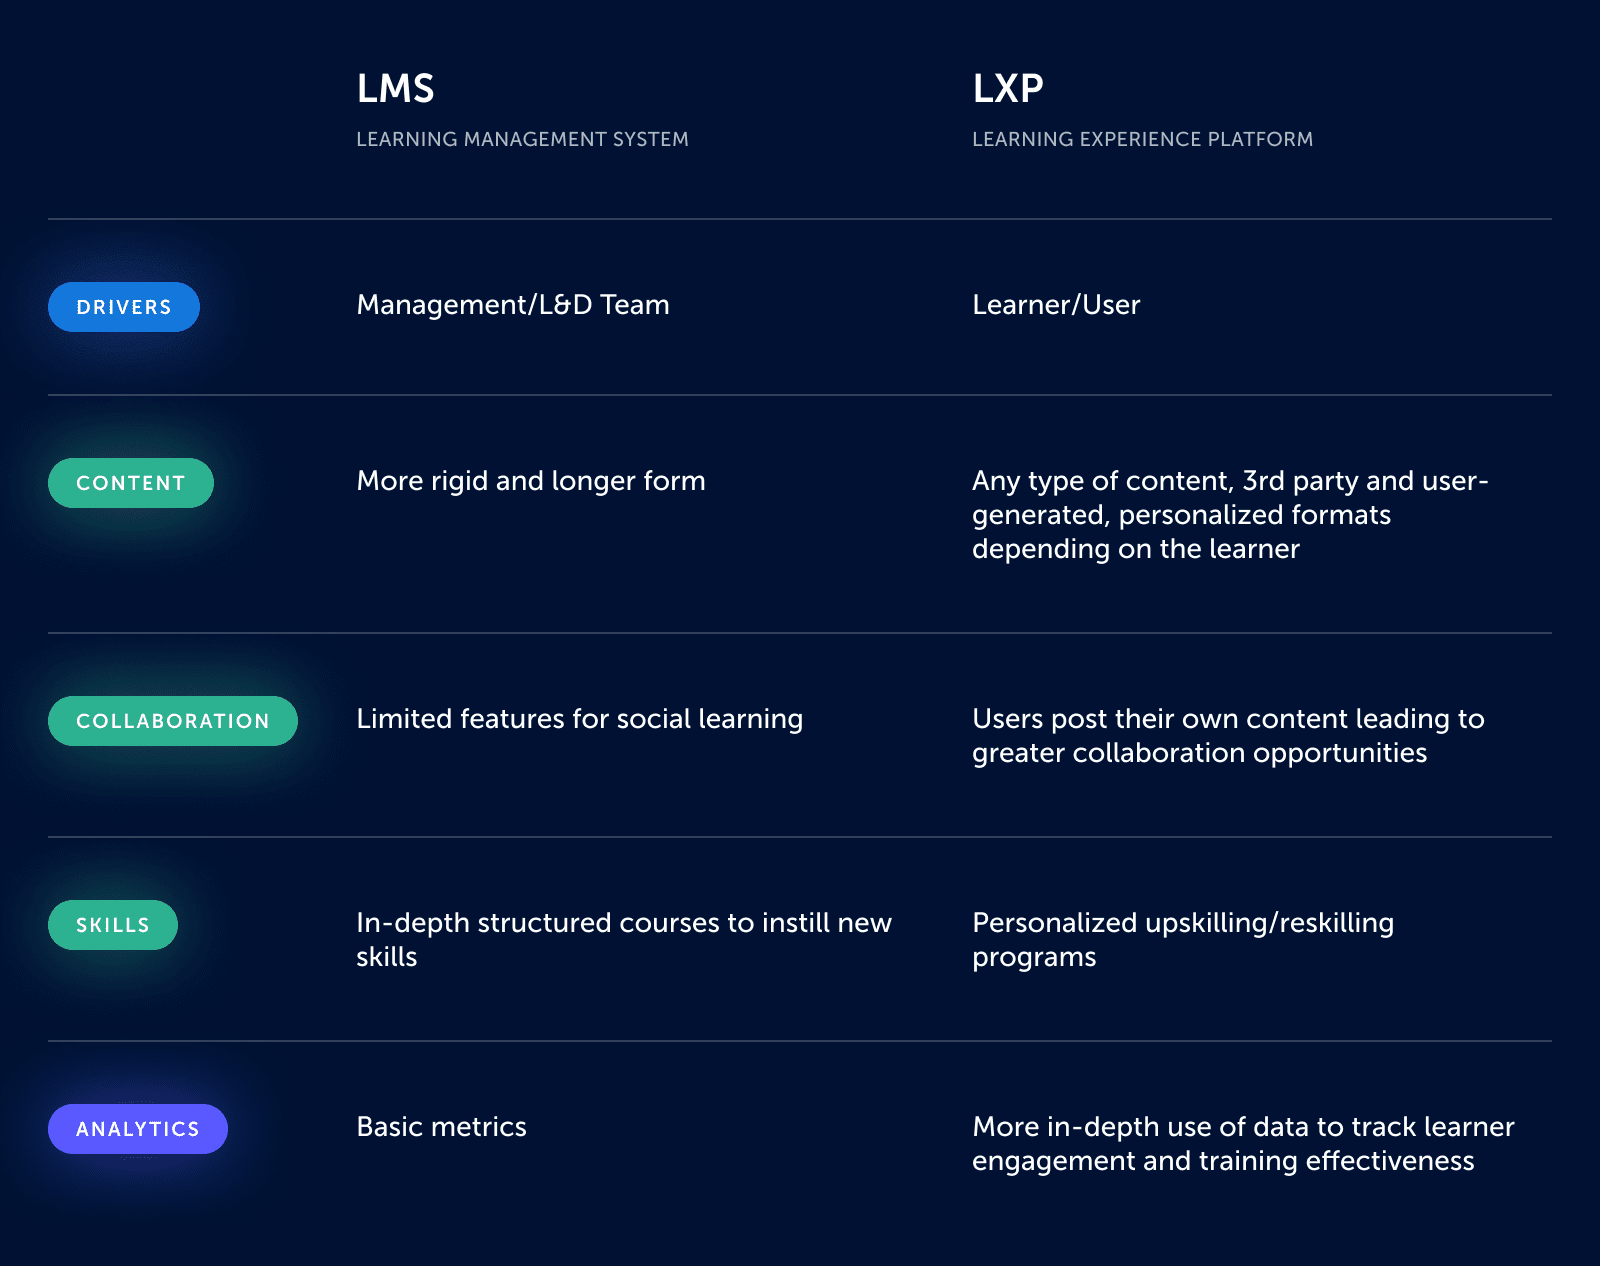 The image lists the comparison between LXP and LMS based on 5 key elements: Drivers, Content, Collaboration, Skills, and Analytics